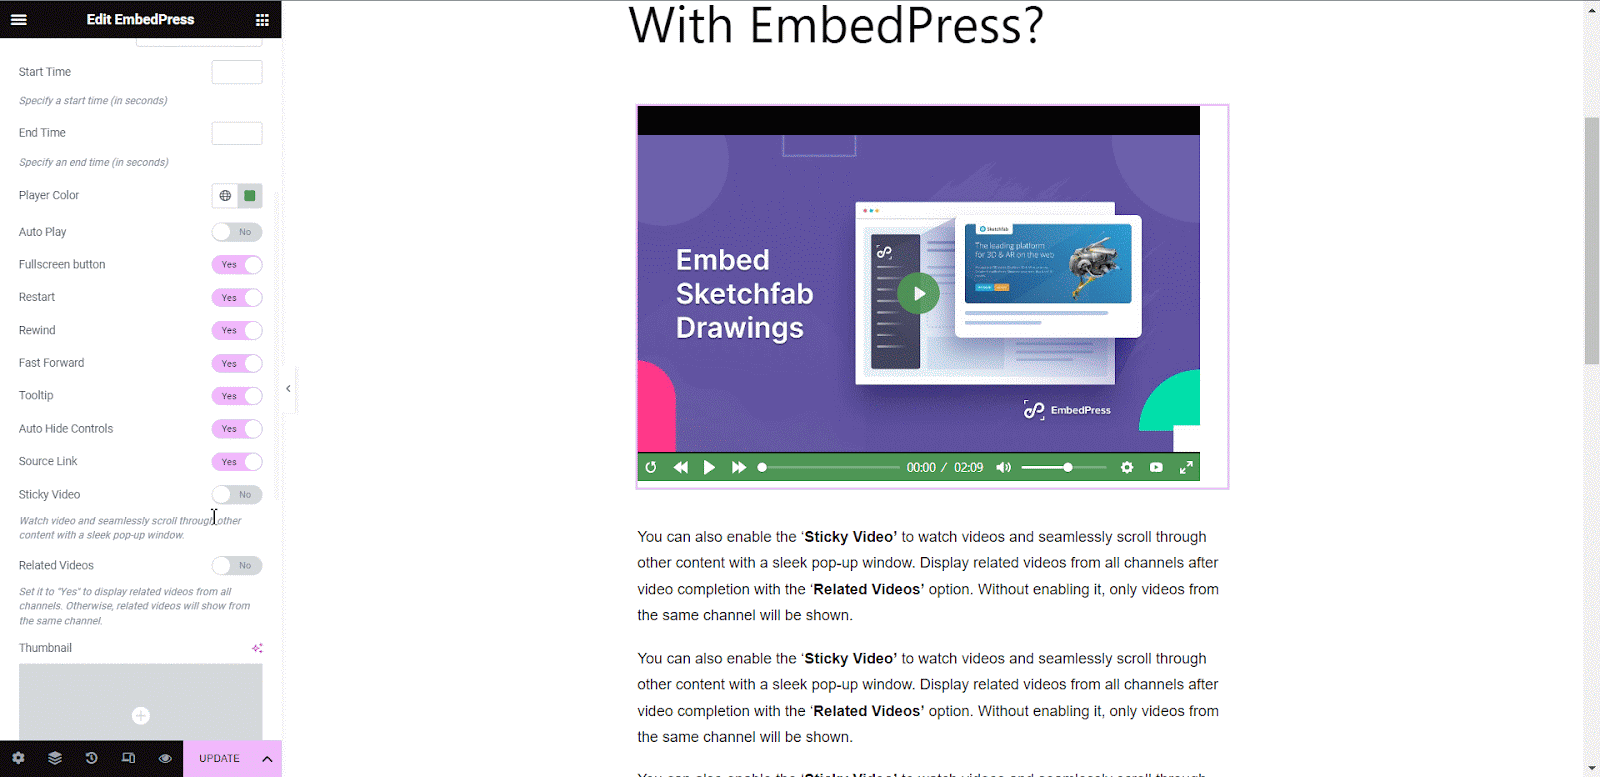 How To Configure Video Custom Player Controls With EmbedPress?